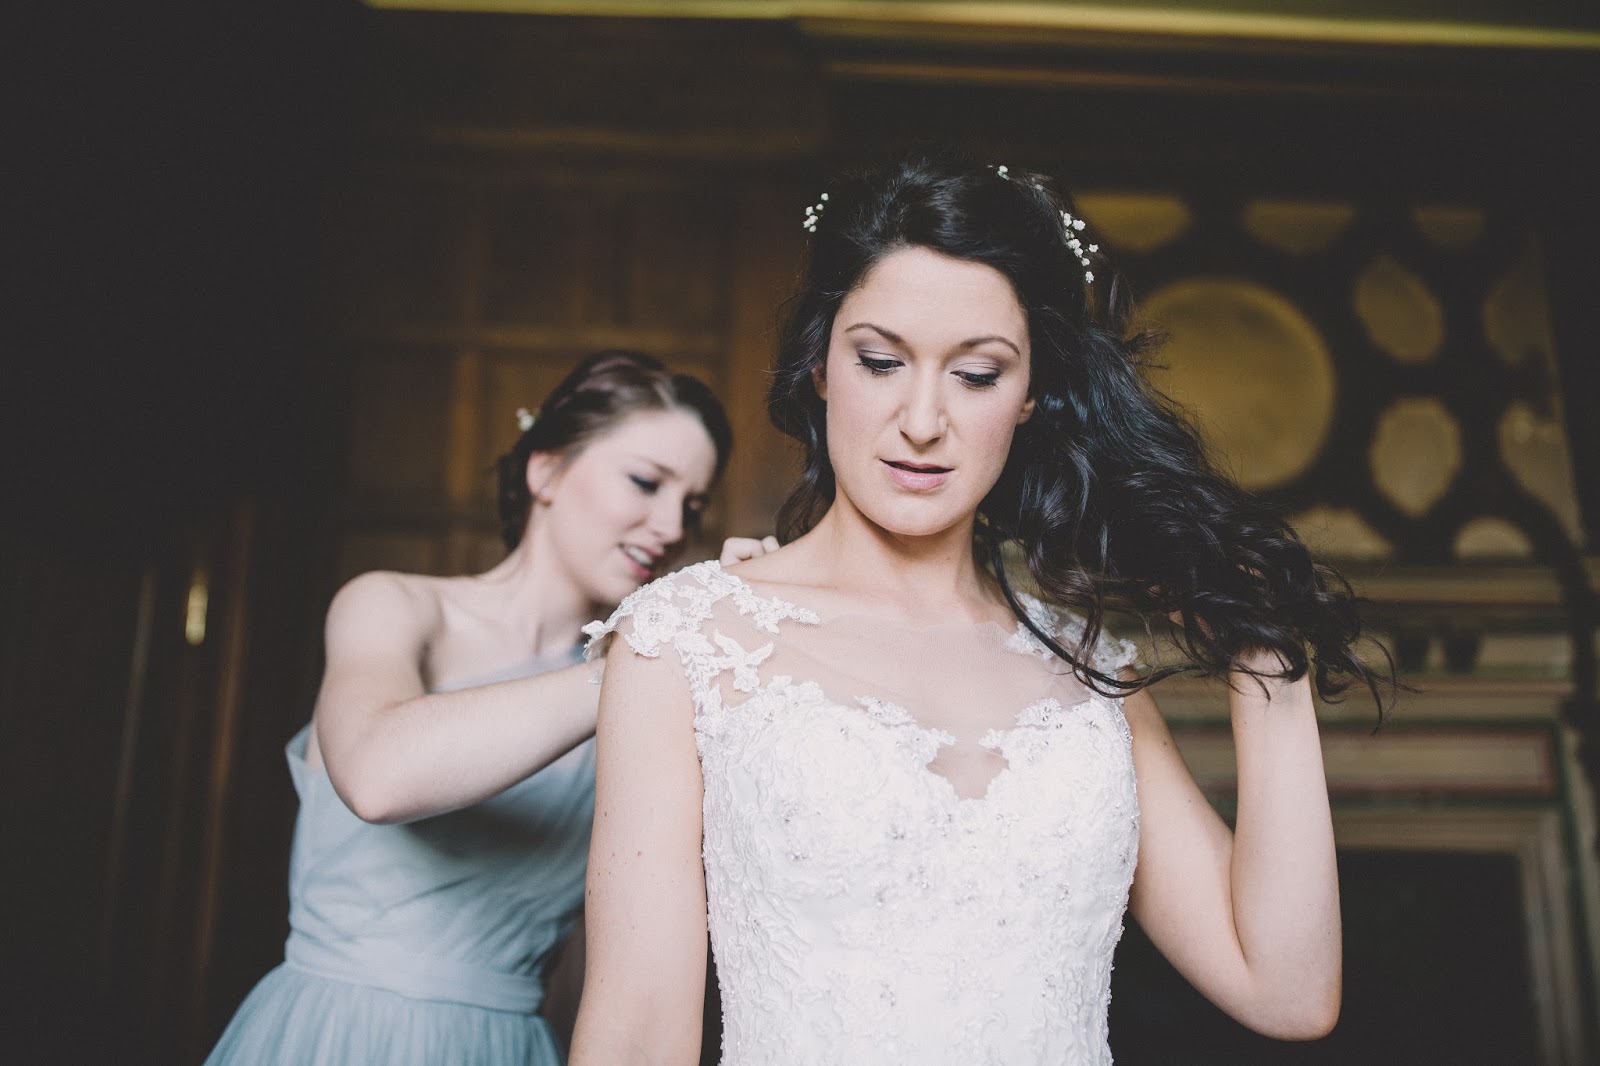 Eve Dunlop Wedding Photography Blog - See My Wedding Pictures